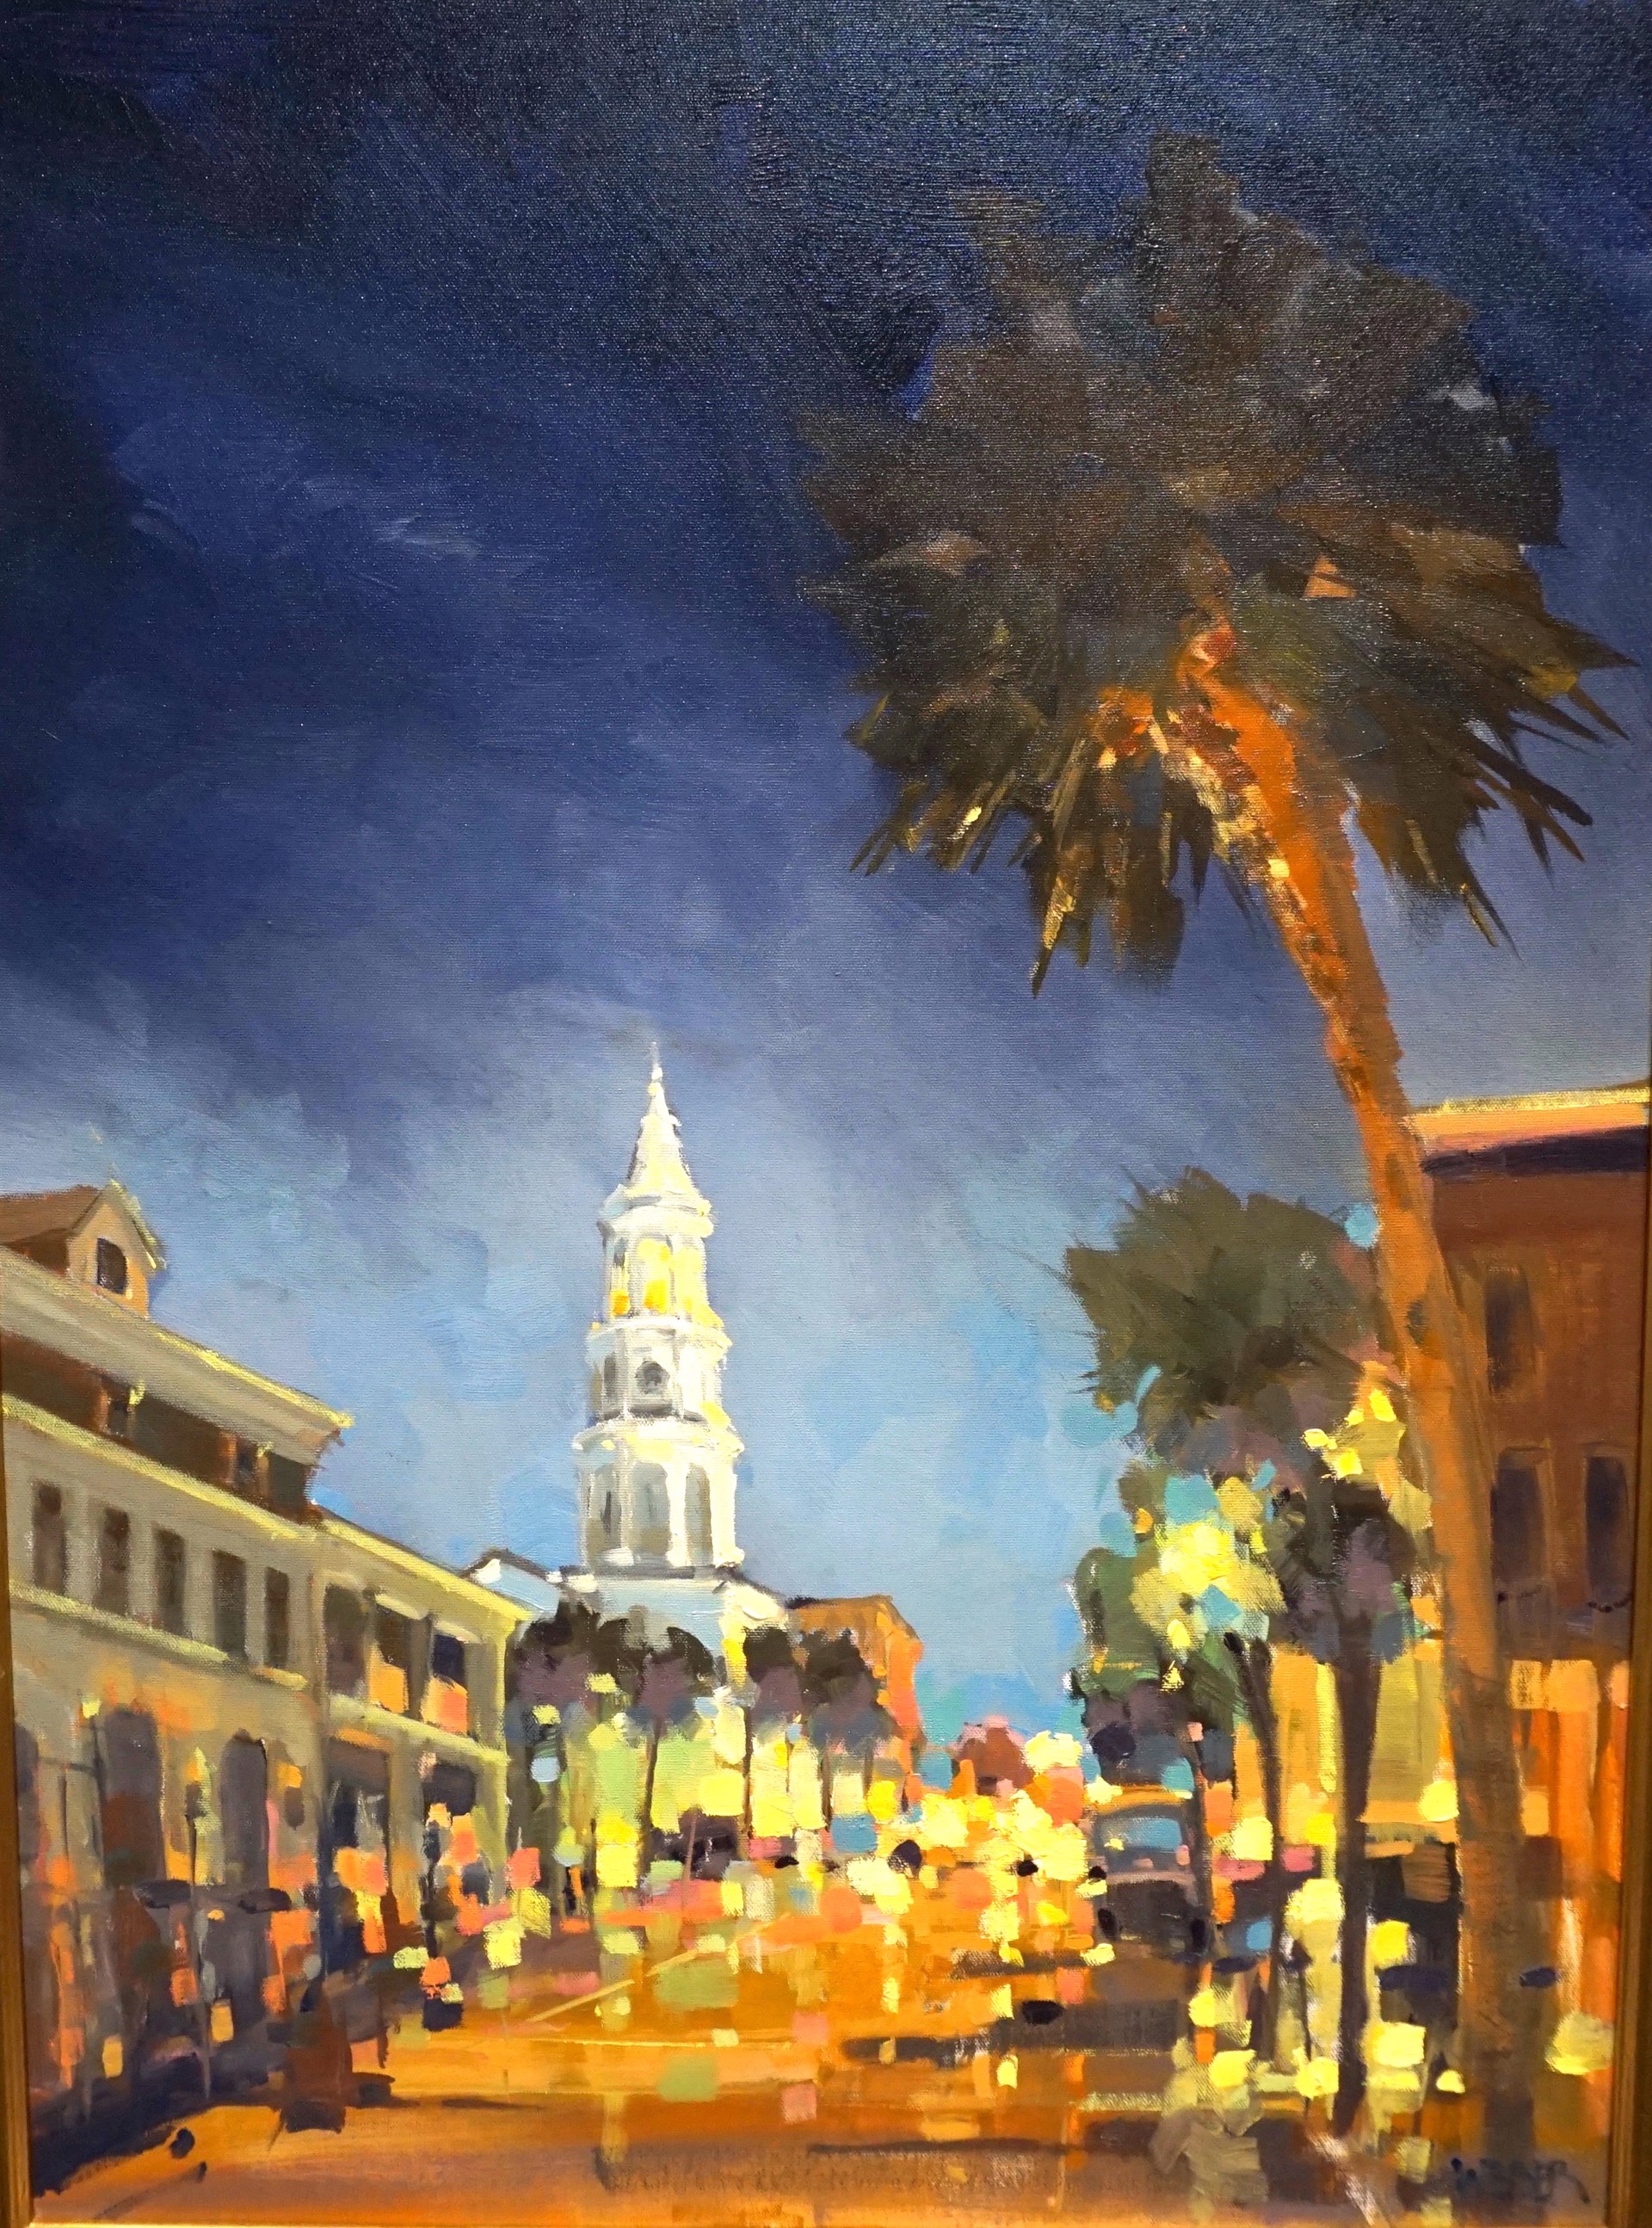 Twilight on Broad Street by Donald Weber